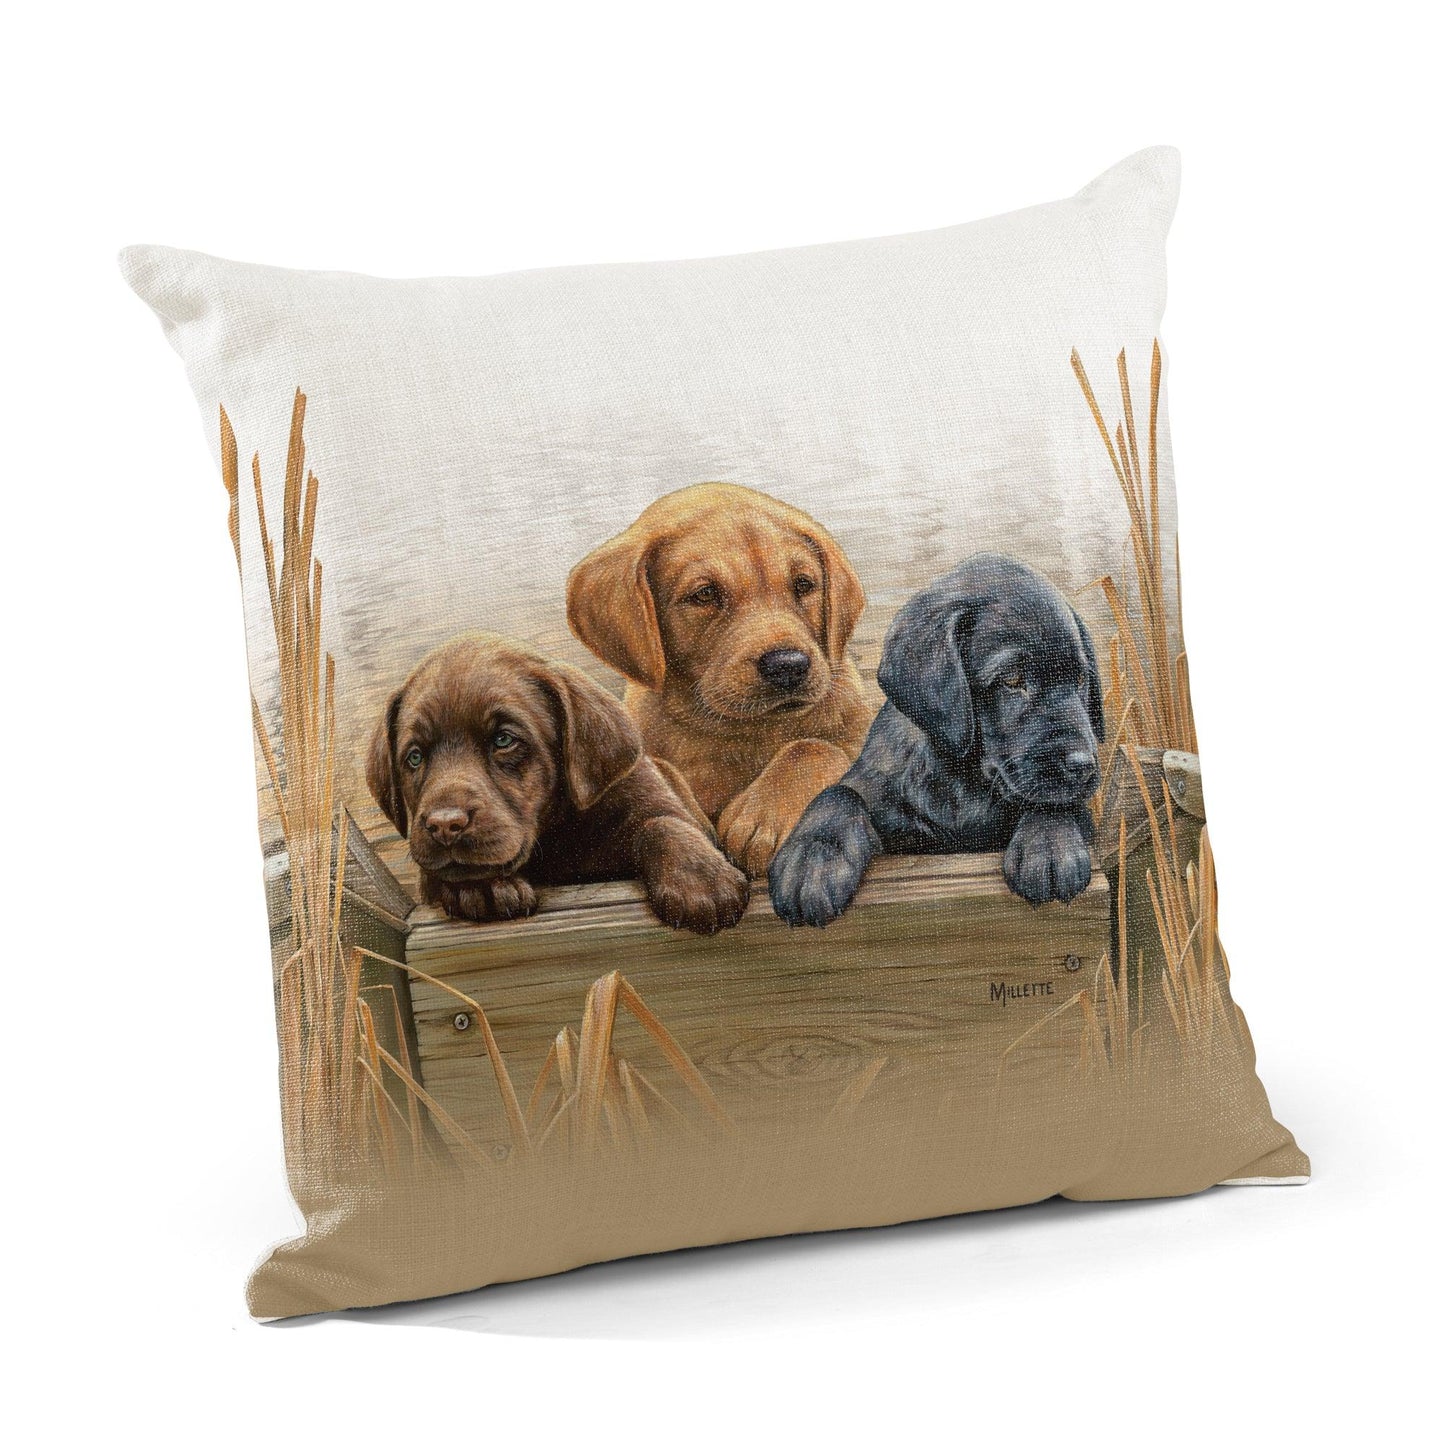 All Hands on Deck - Puppies 18" Decorative Pillow - Wild Wings